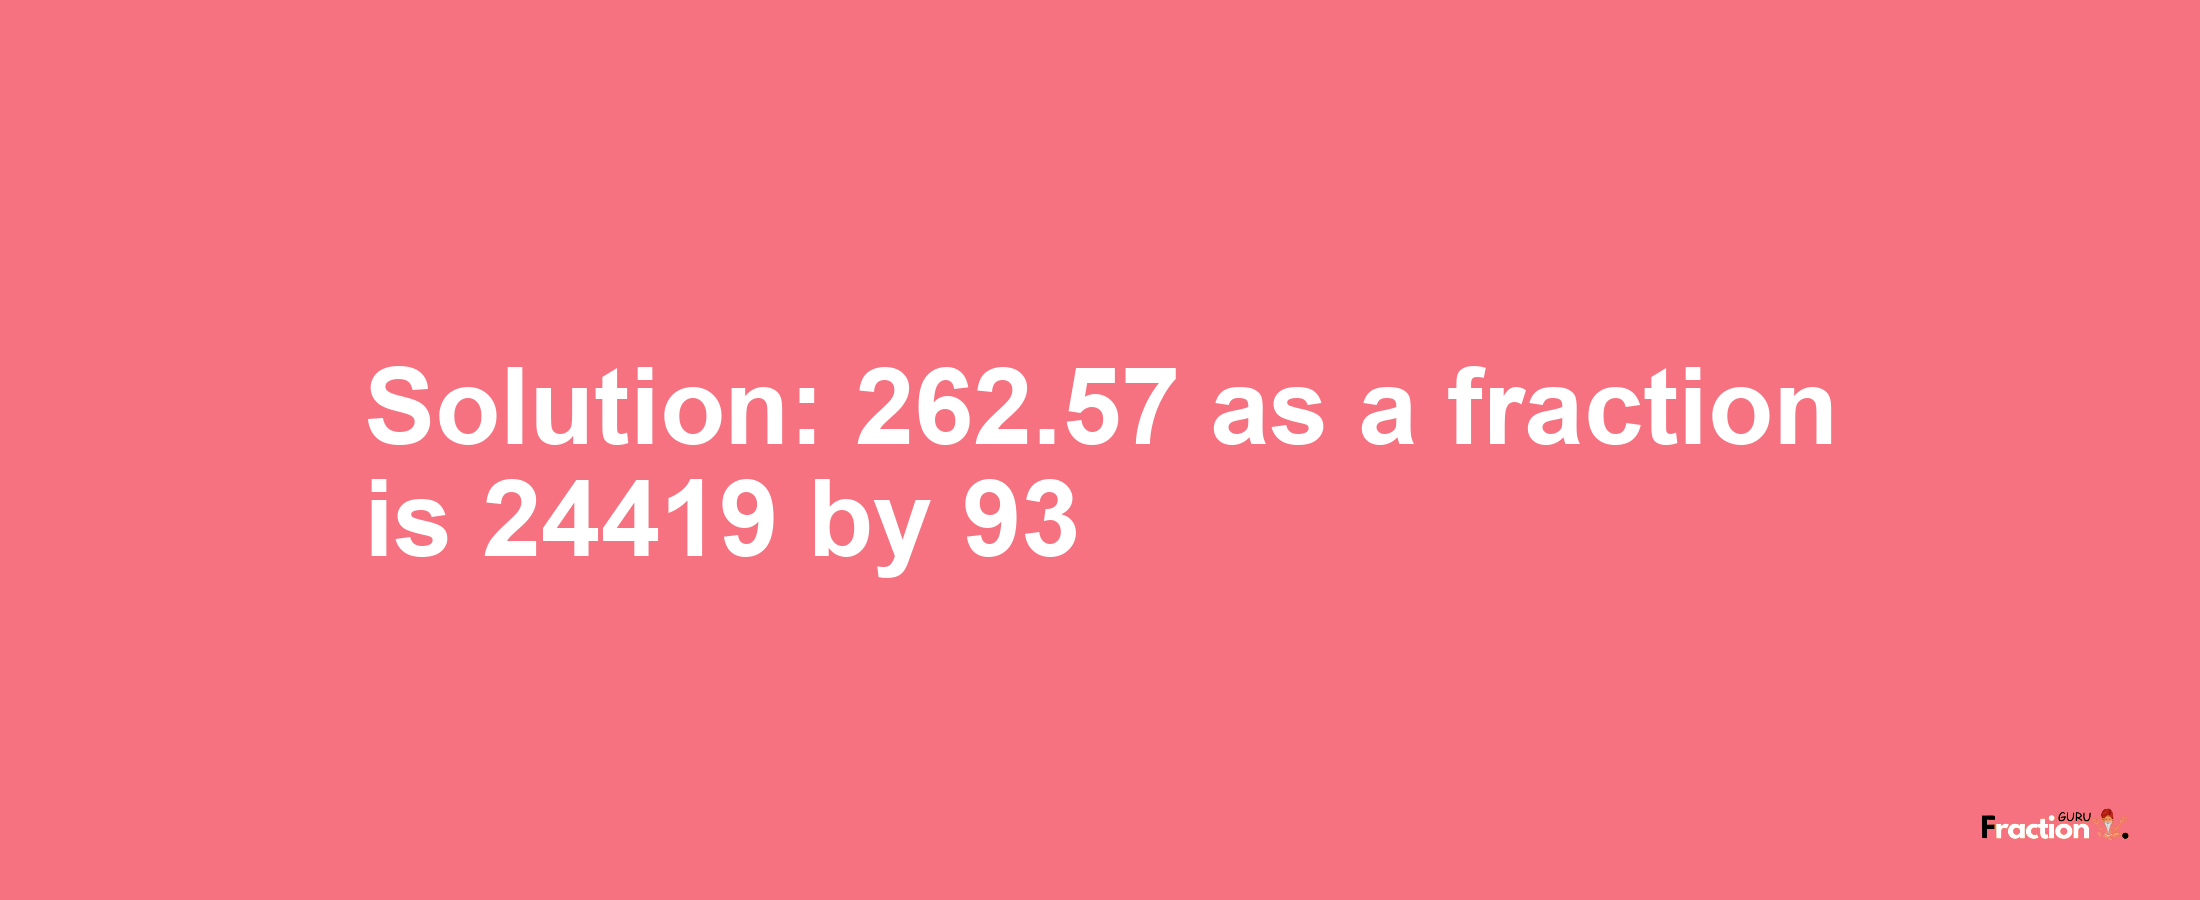 Solution:262.57 as a fraction is 24419/93